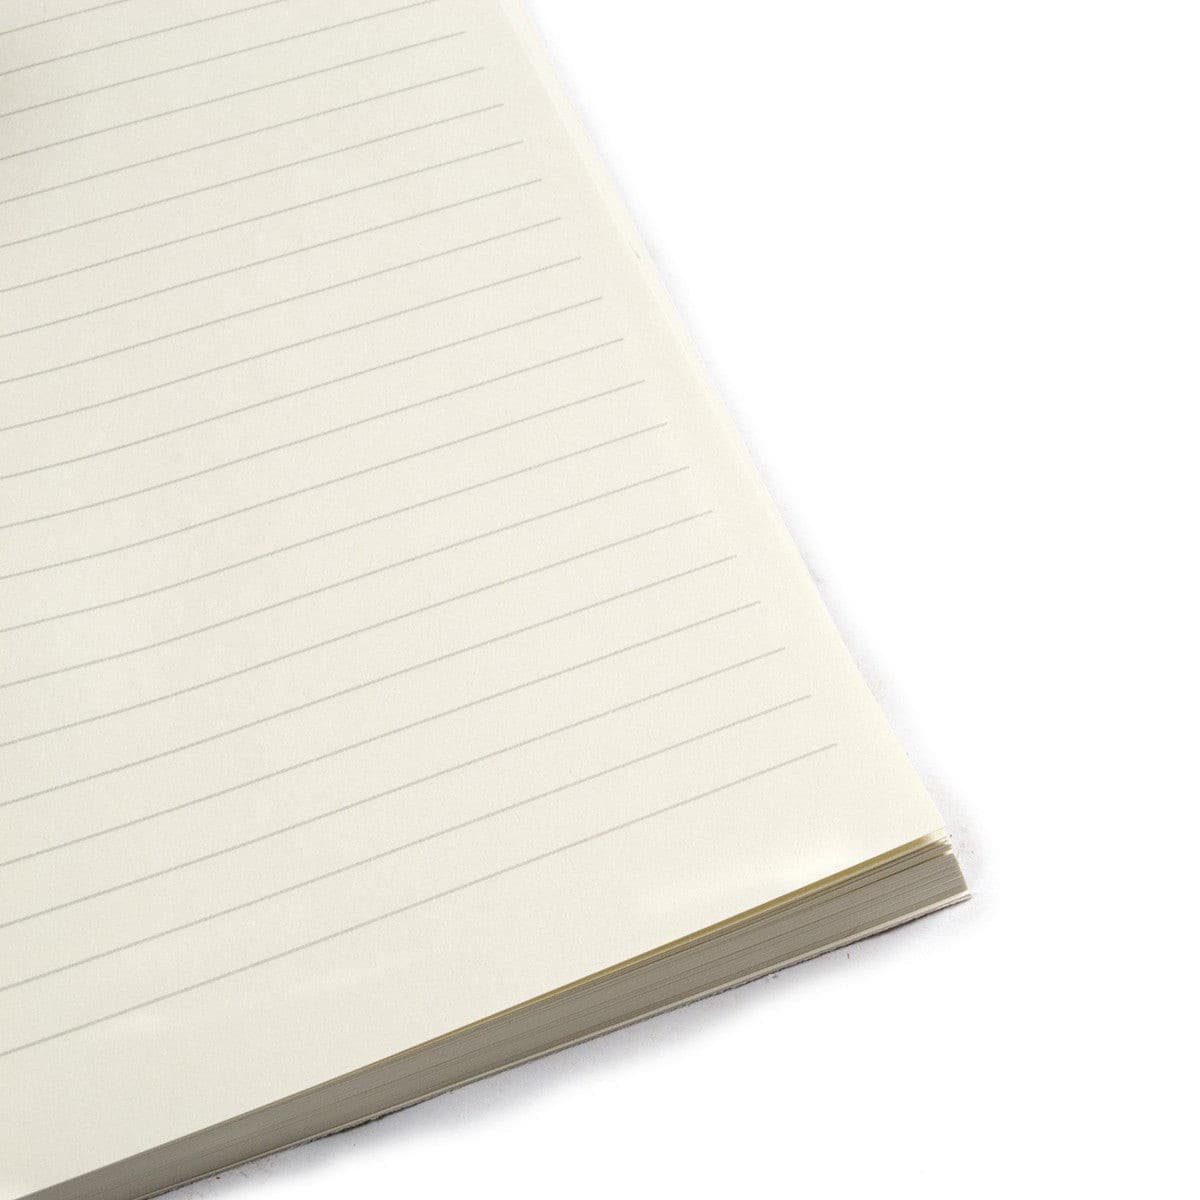 Premium Refill for the Writers Log Large Refillable Notebook - Lined Paper.